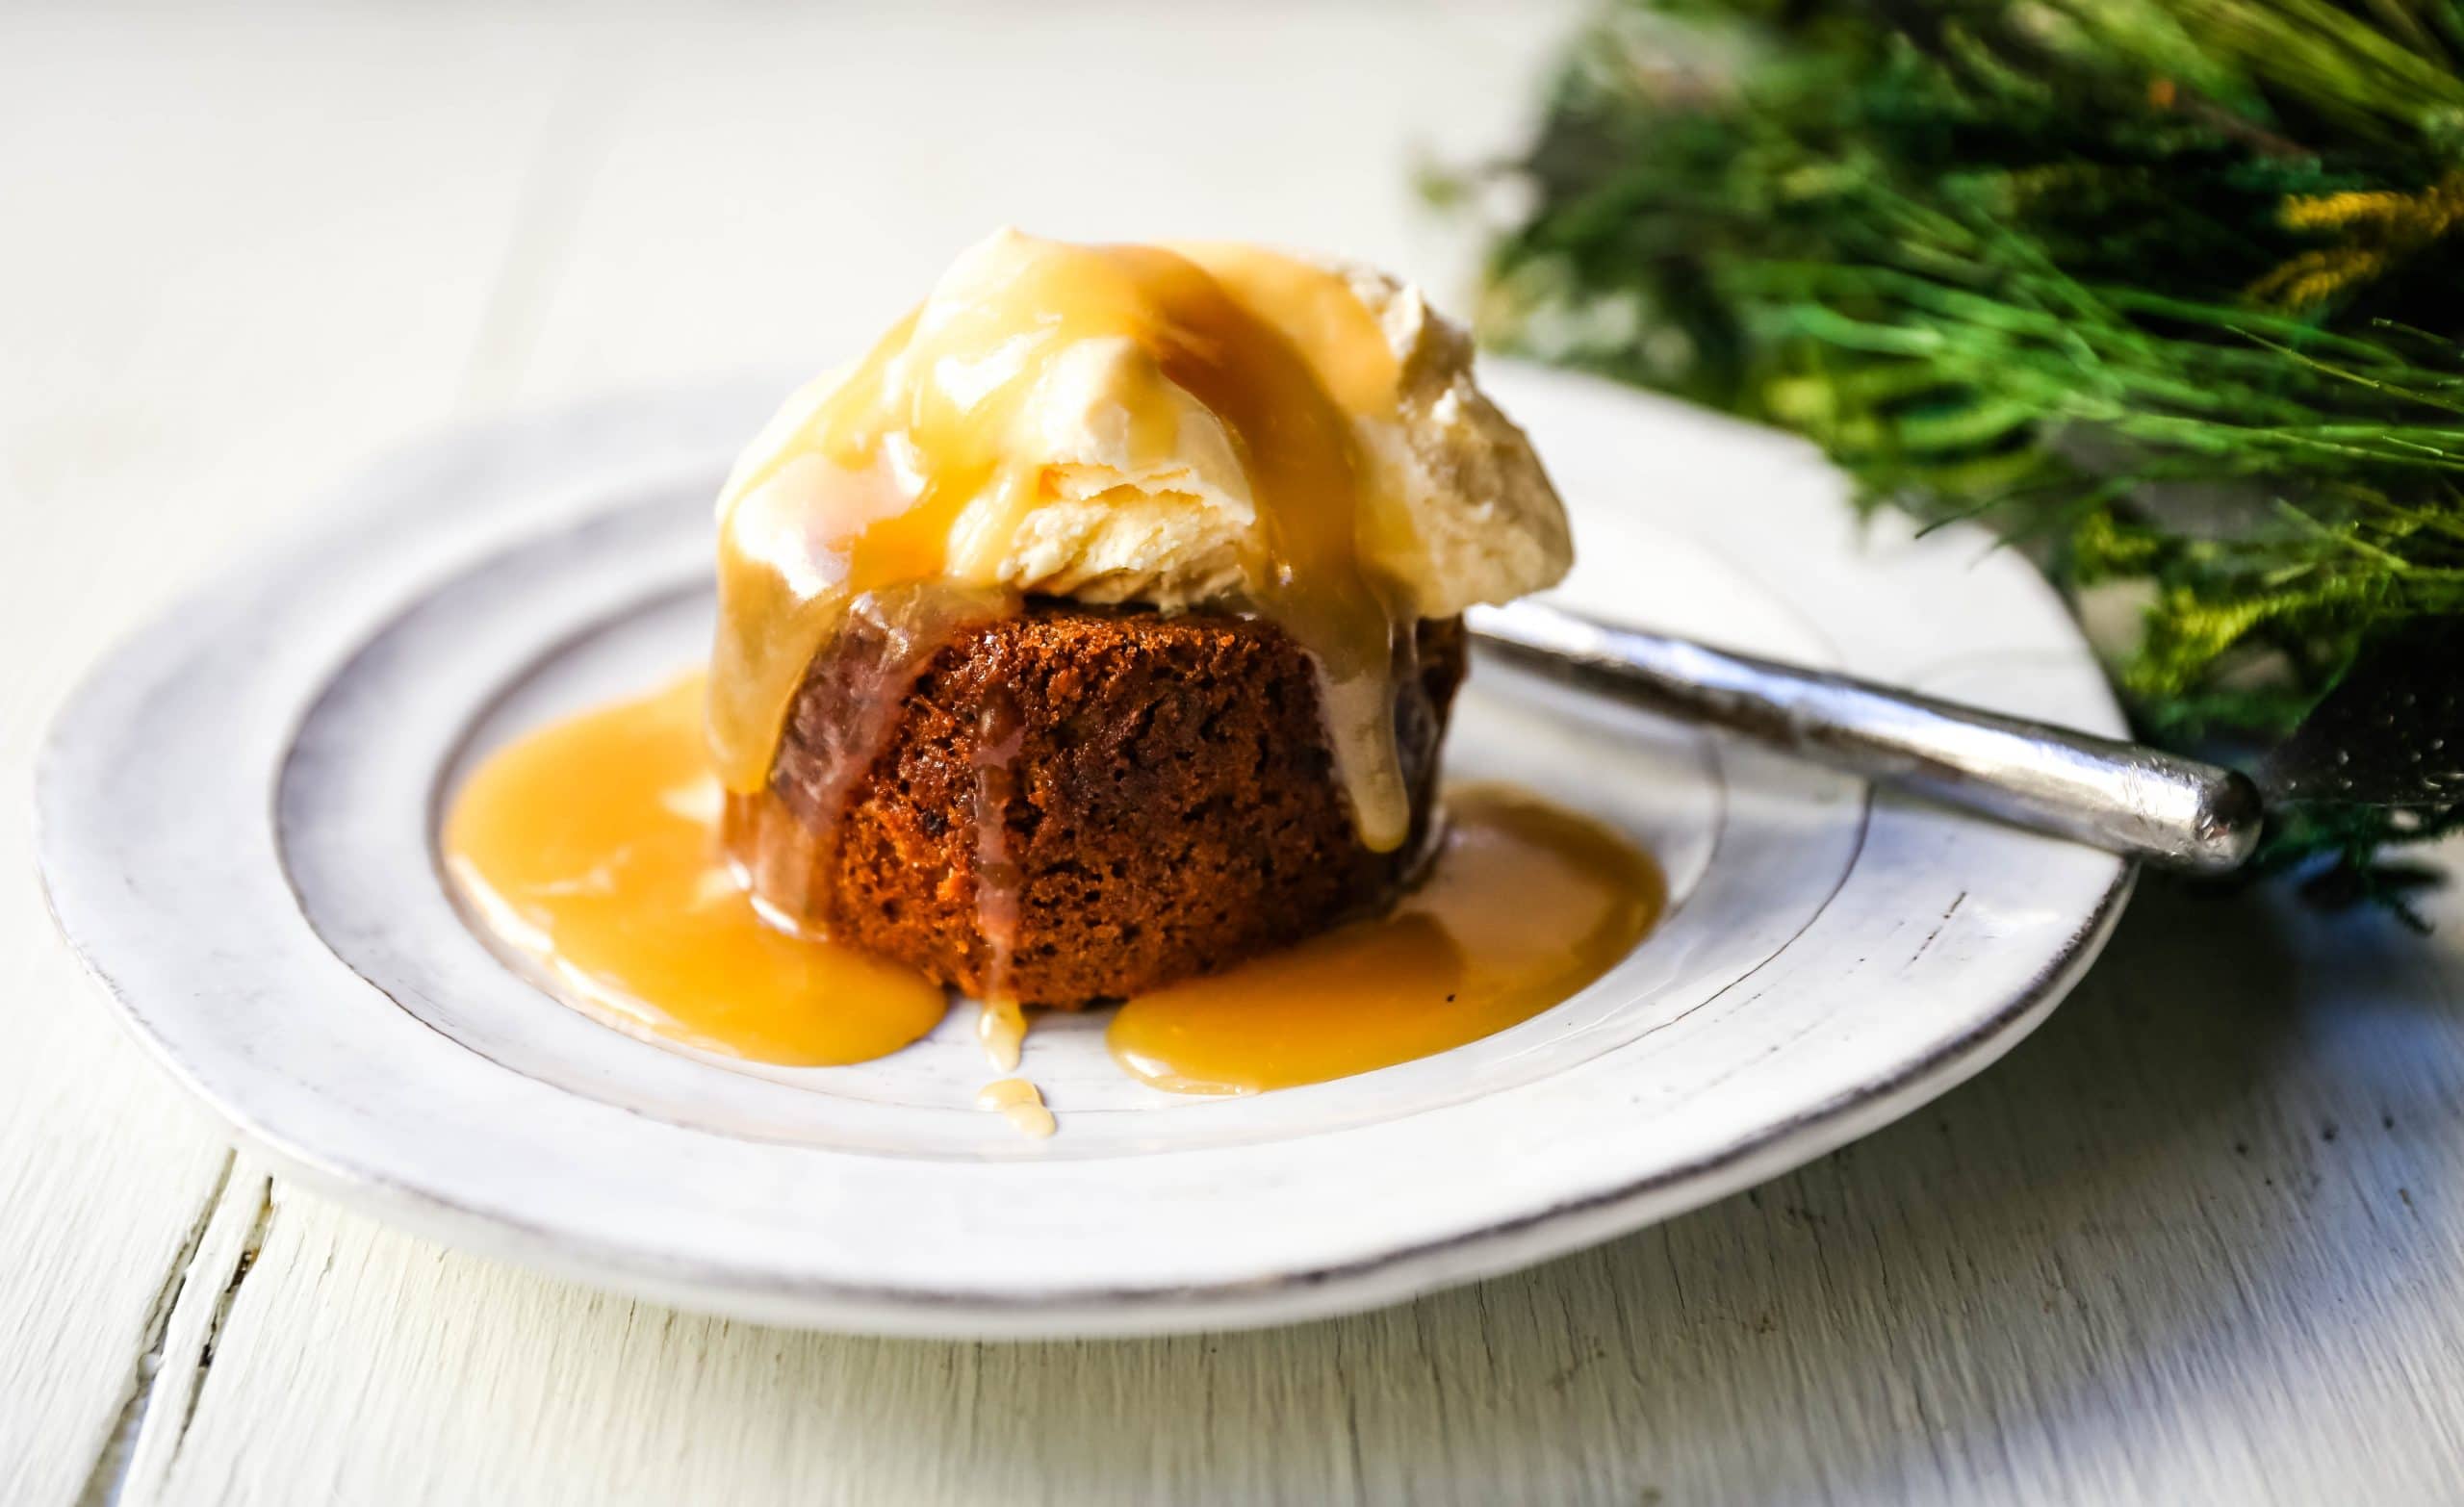 Sticky Toffee Pudding. A famous English dessert with a moist sponge cake covered in a homemade caramel toffee sauce and vanilla ice cream. The perfect Christmas dessert or holiday dessert recipe. A Christmas traditional dessert. www.modernhoney.com #stickytoffeepudding #toffeepudding #stickypudding #datecake